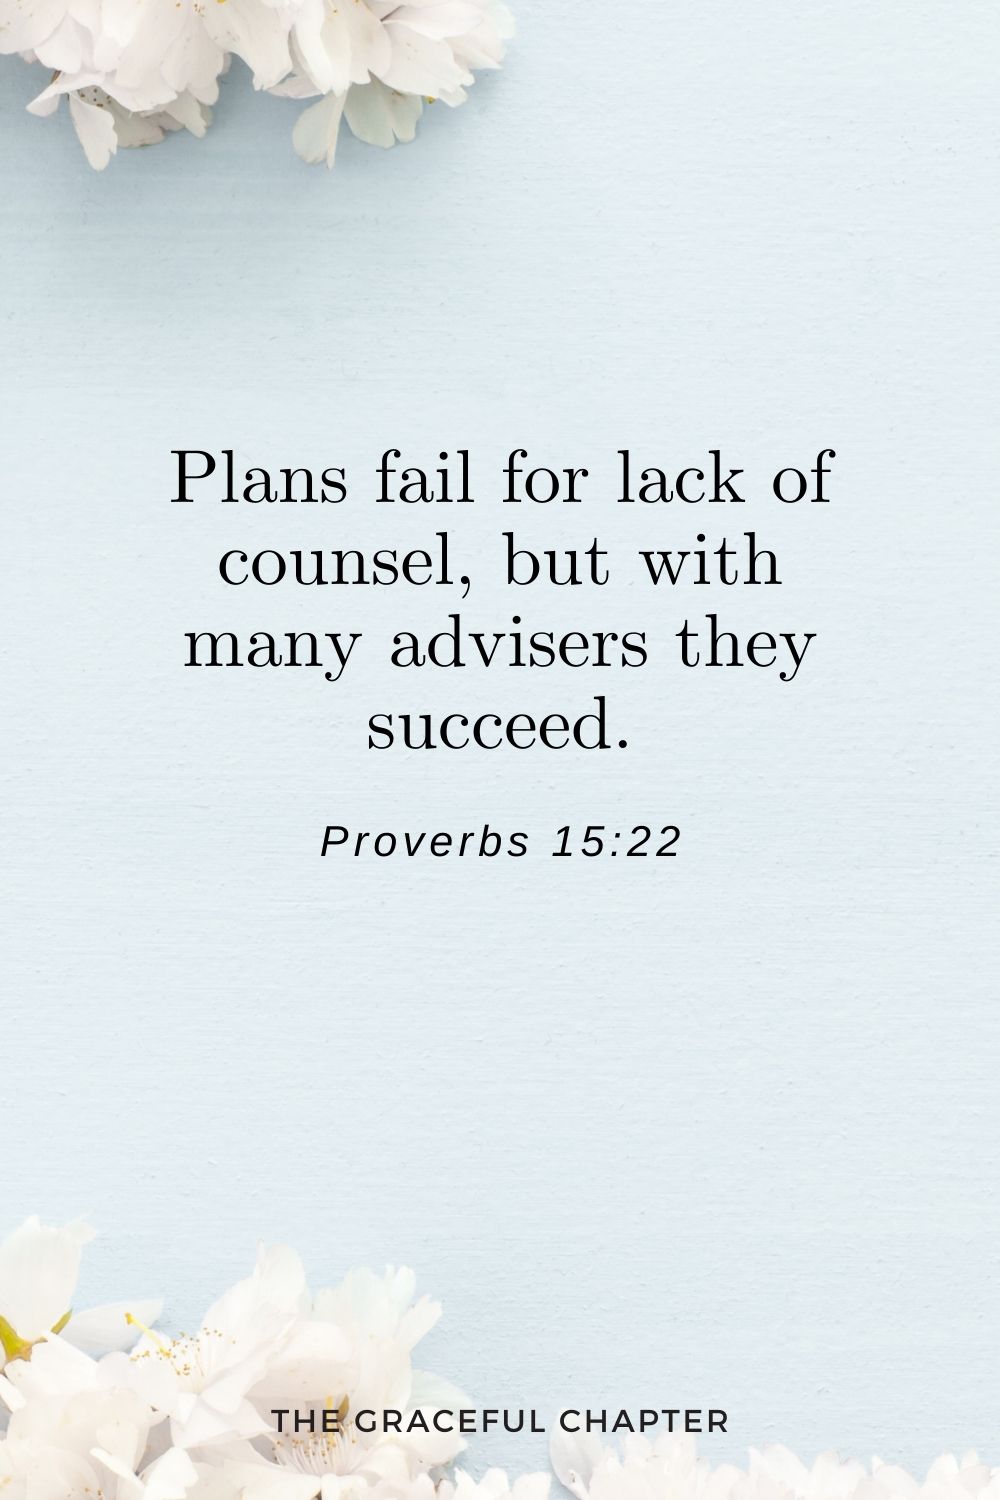 Plans fail for lack of counsel, but with many advisers they succeed. Proverbs 15:22